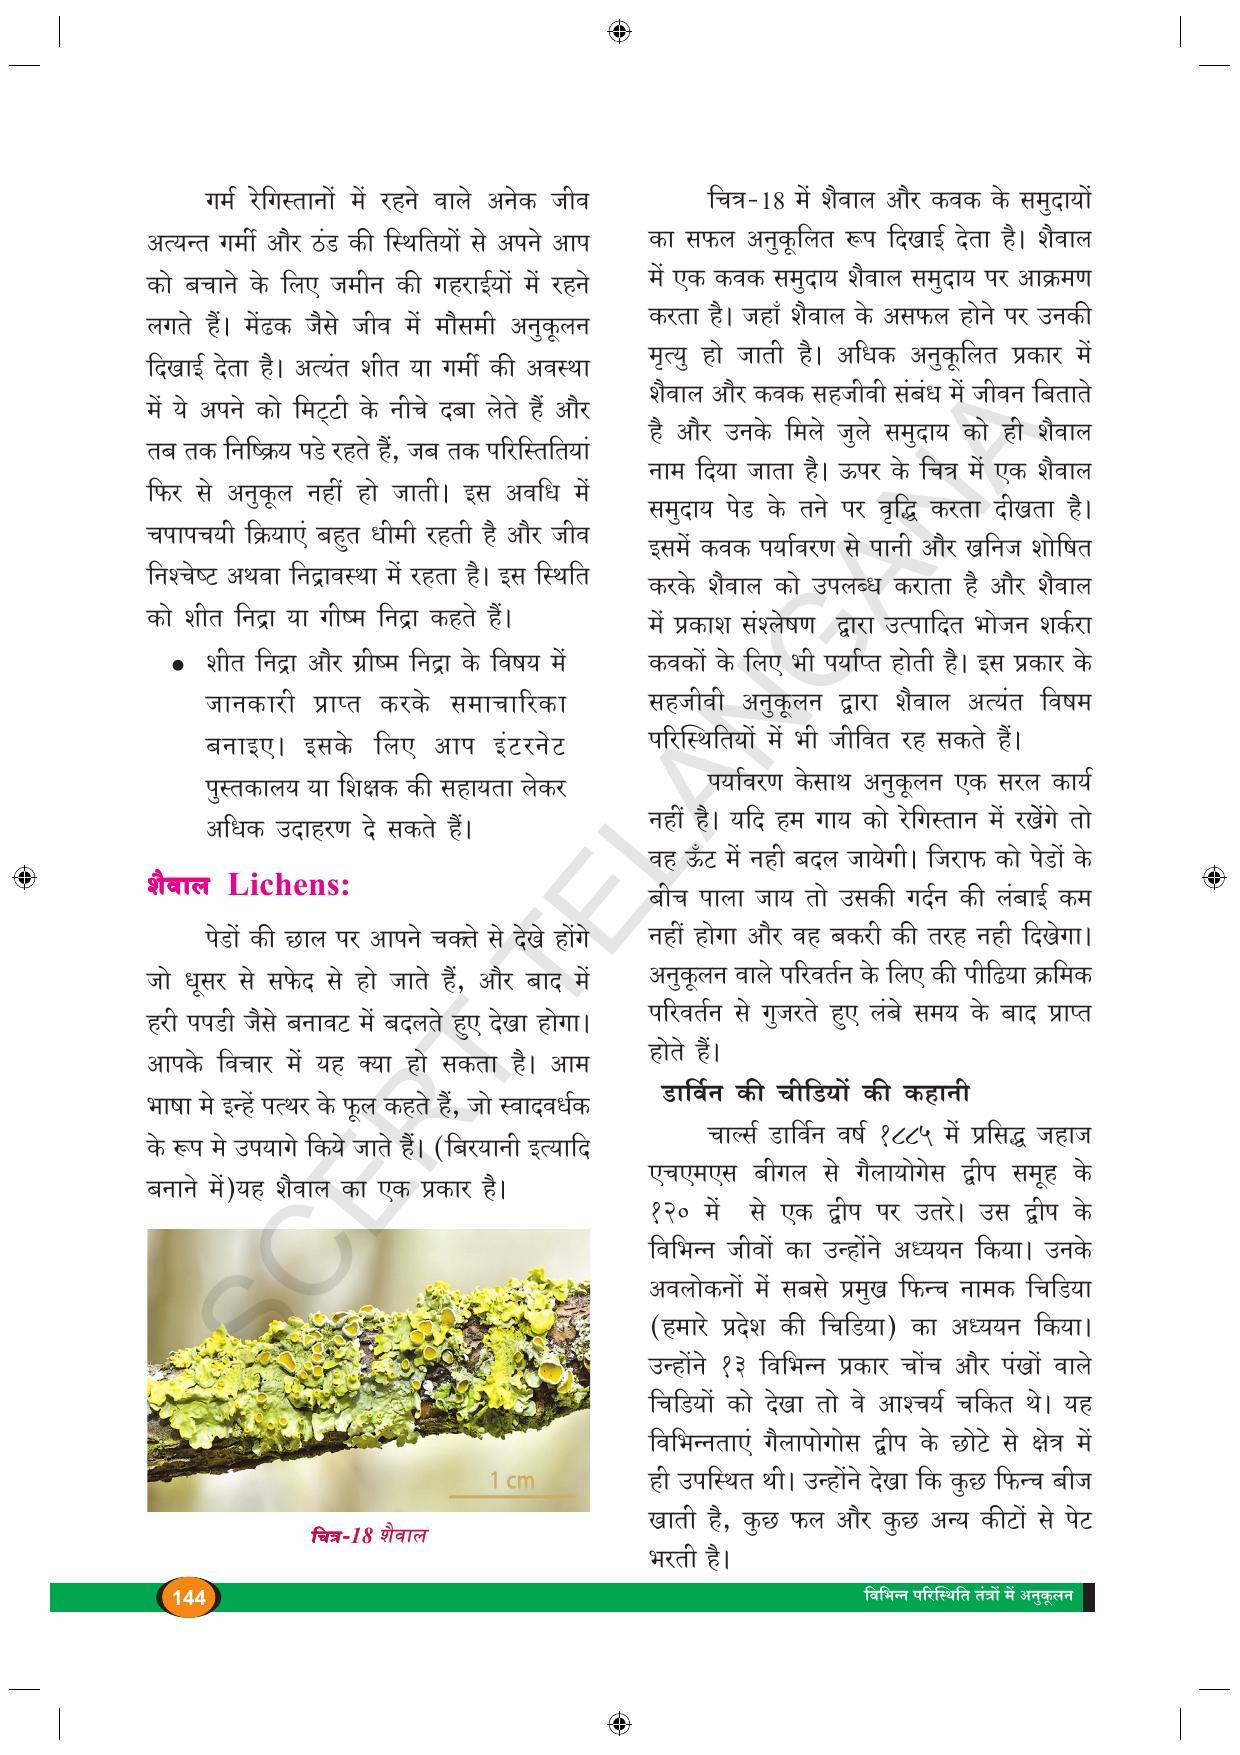 TS SCERT Class 9 Biological Science (Hindi Medium) Text Book - Page 156